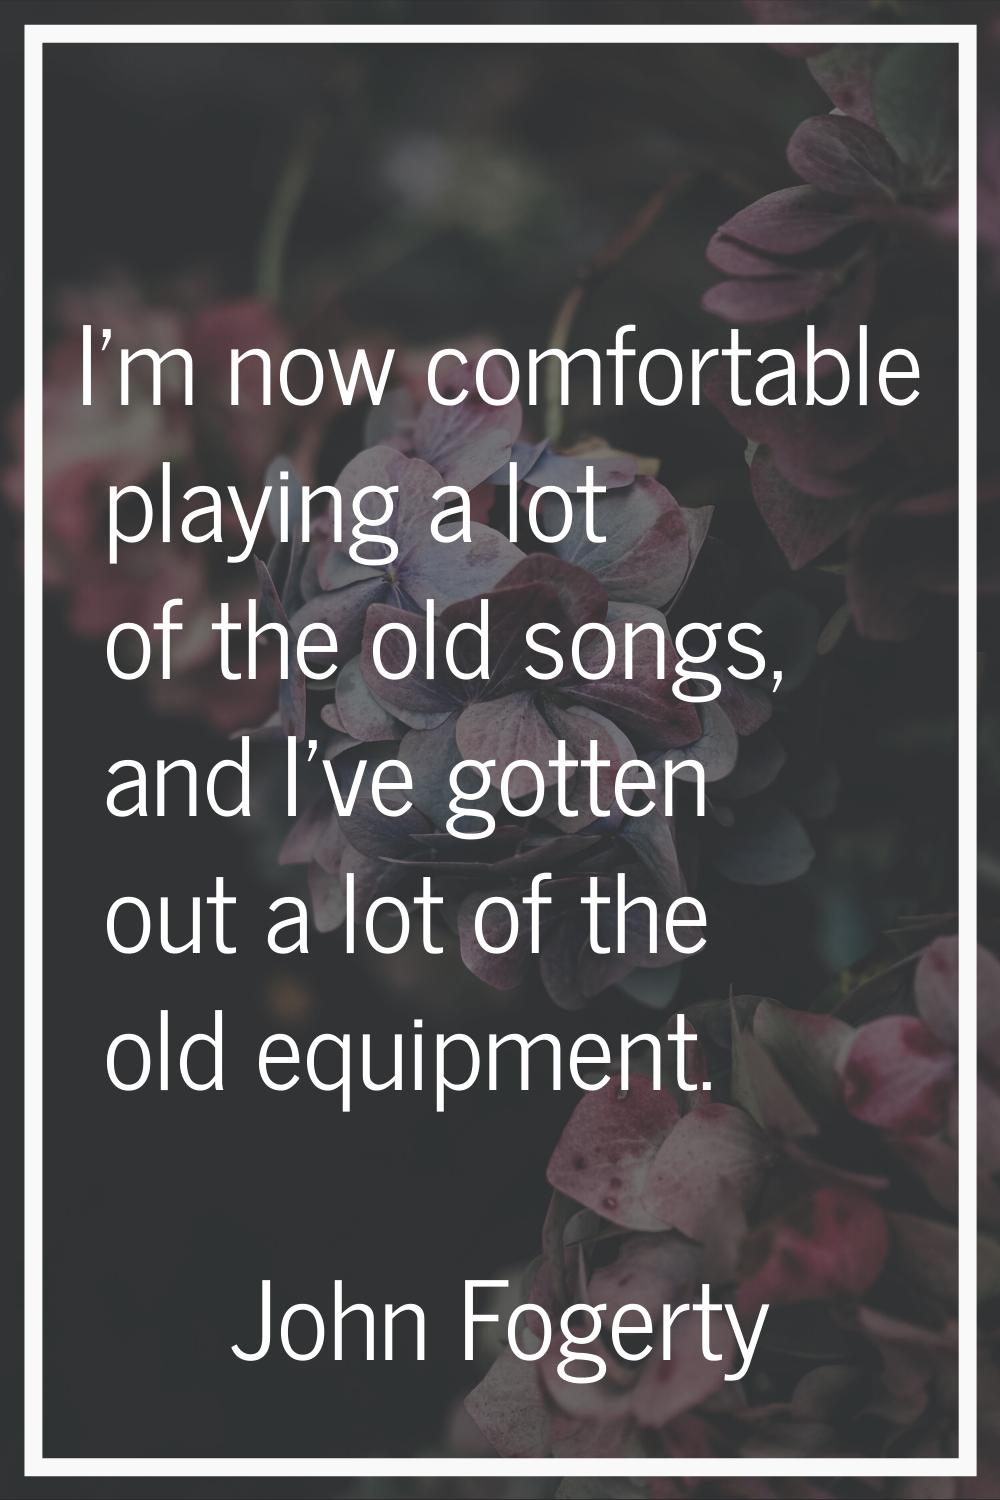 I'm now comfortable playing a lot of the old songs, and I've gotten out a lot of the old equipment.